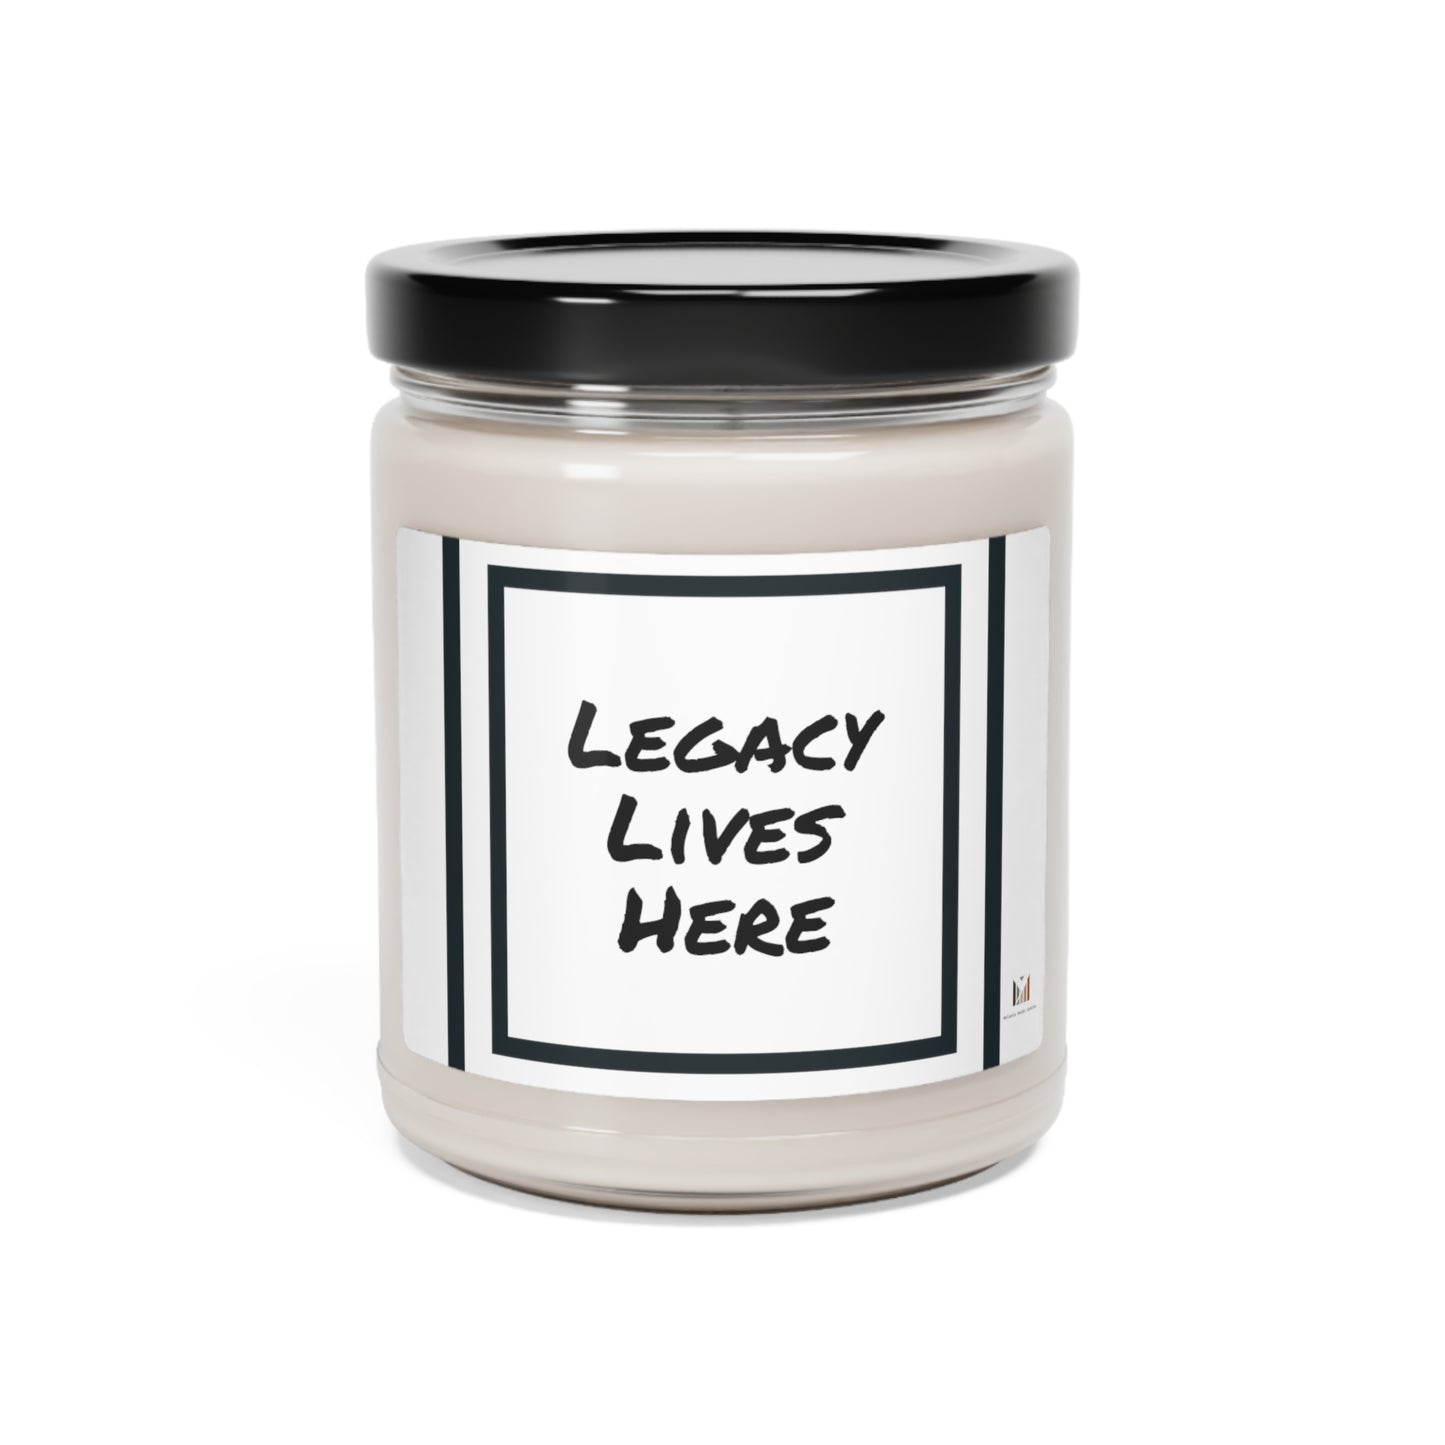 "Legacy Lives" Scented Soy Candle, 9oz